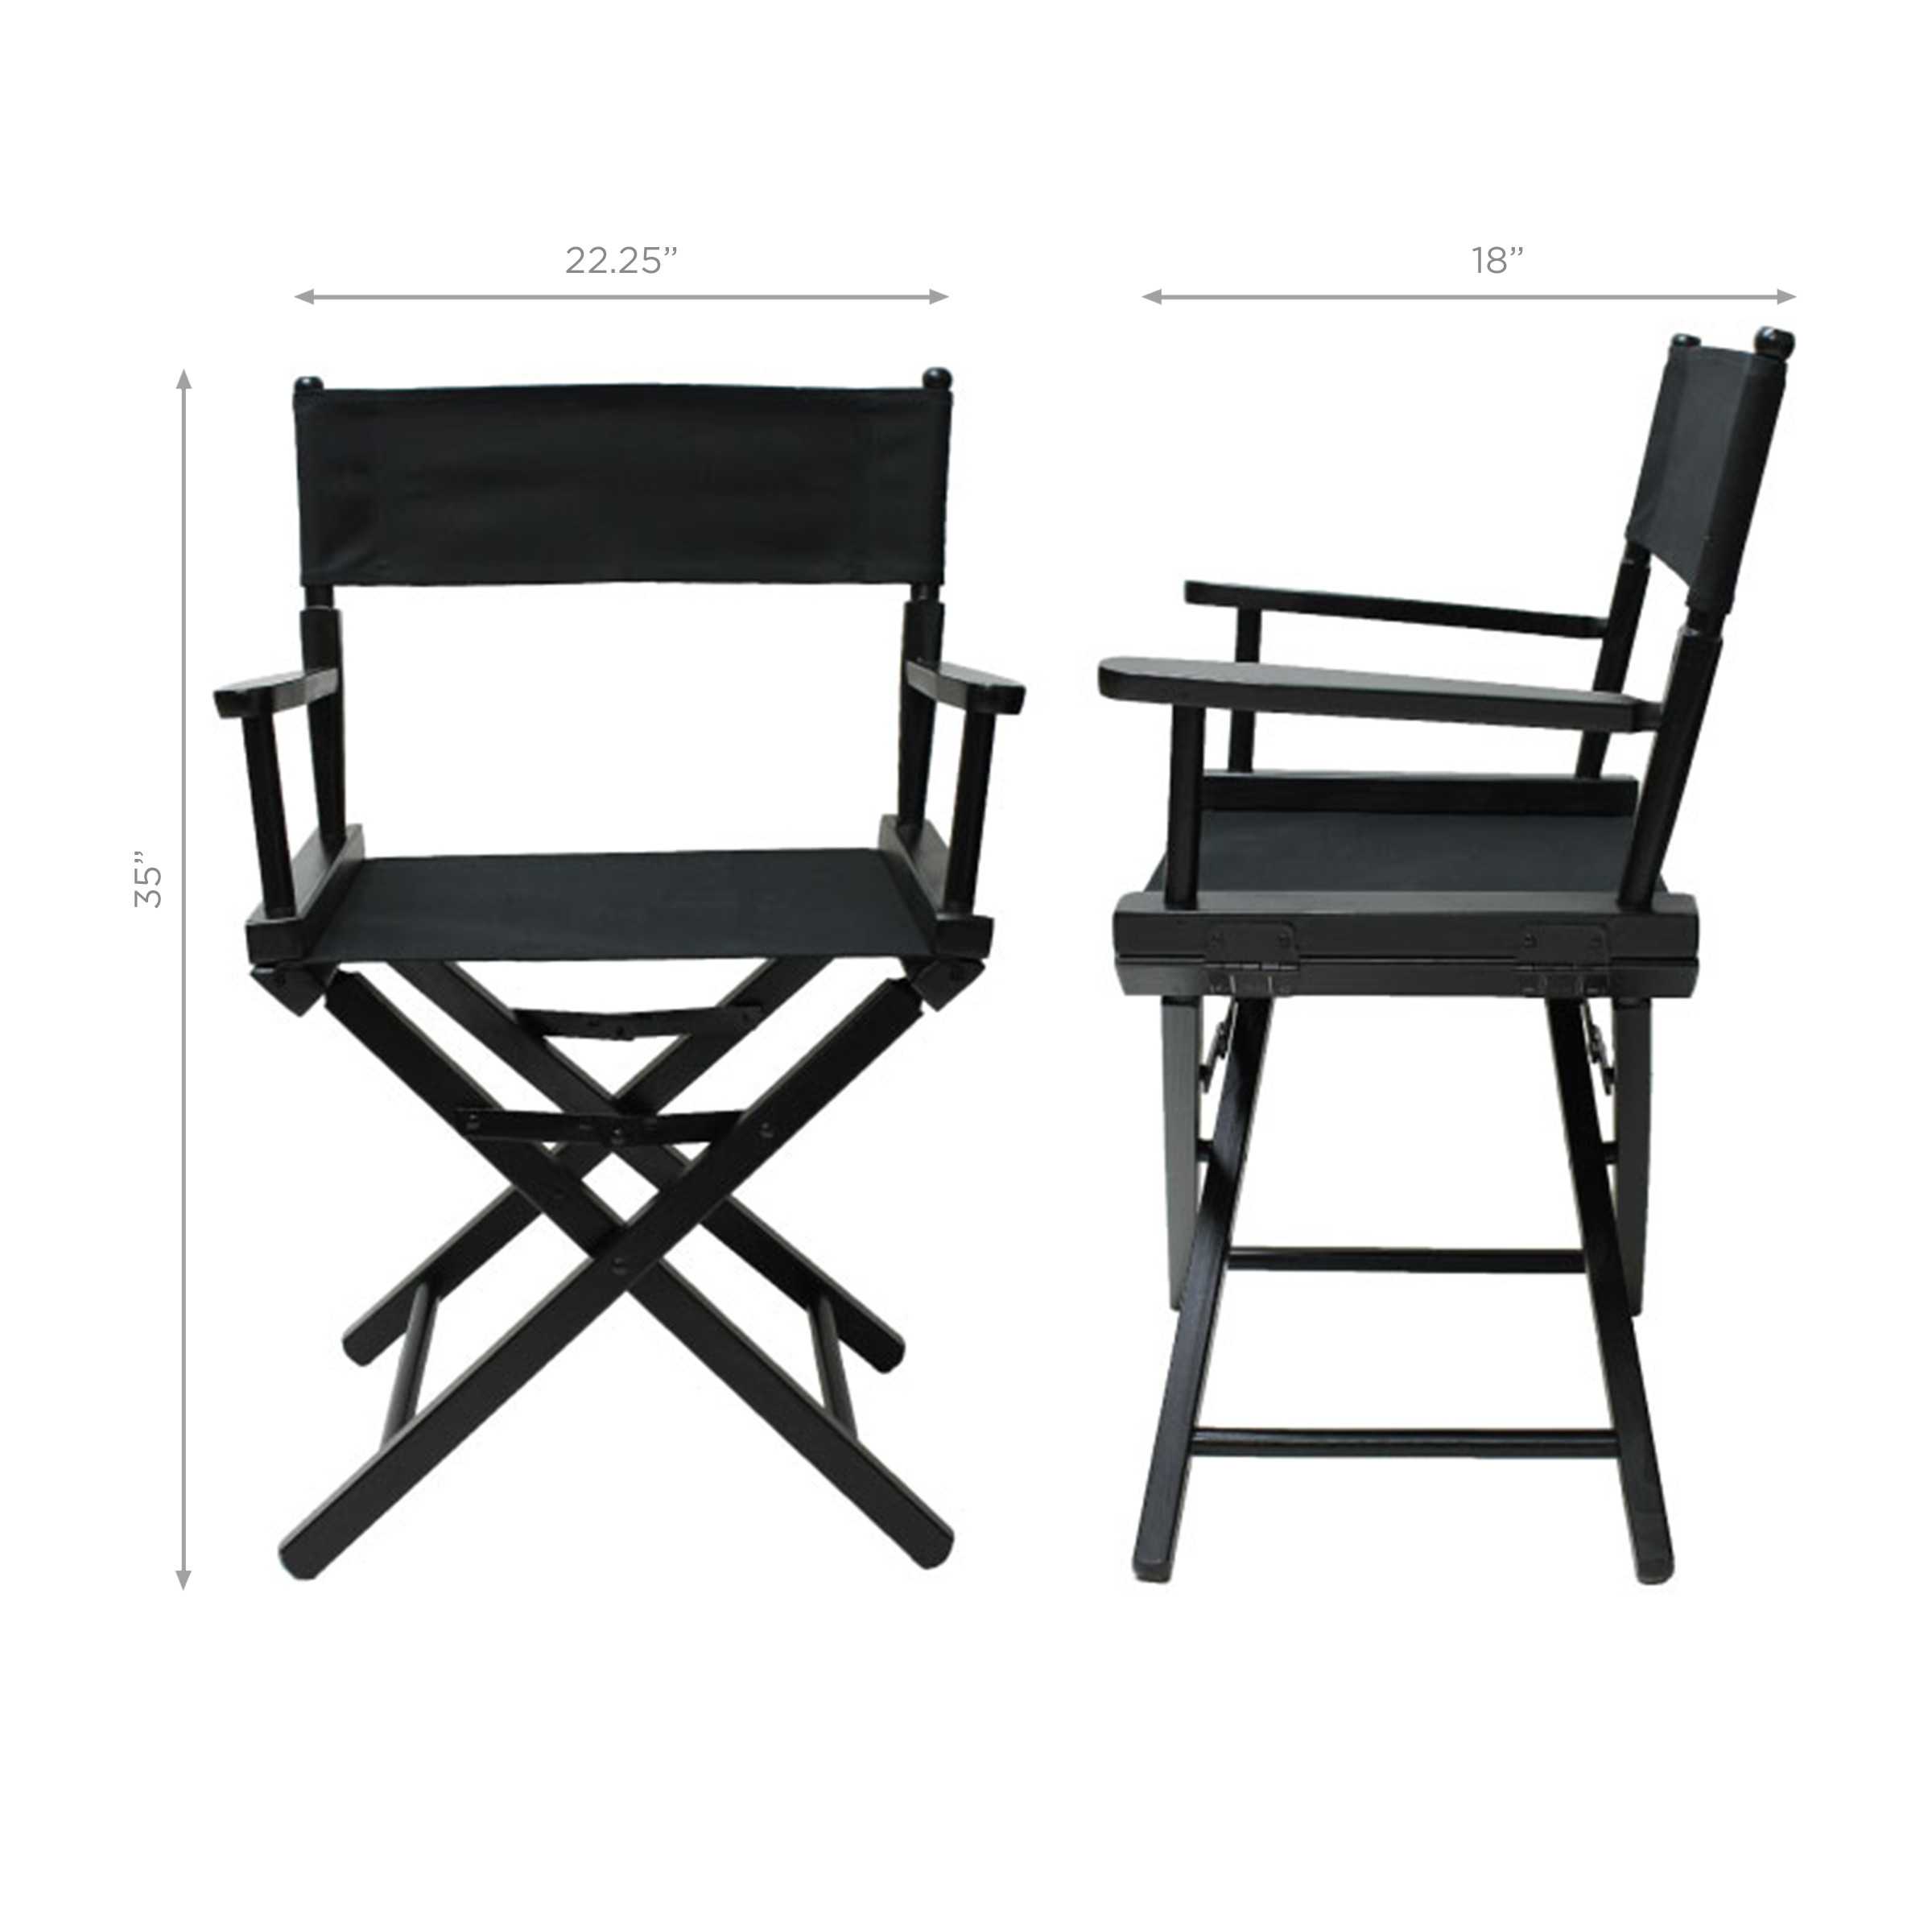 JAMES MADISON UNIVERSITY DIRECTORS CHAIR-TABLE HEIGHT